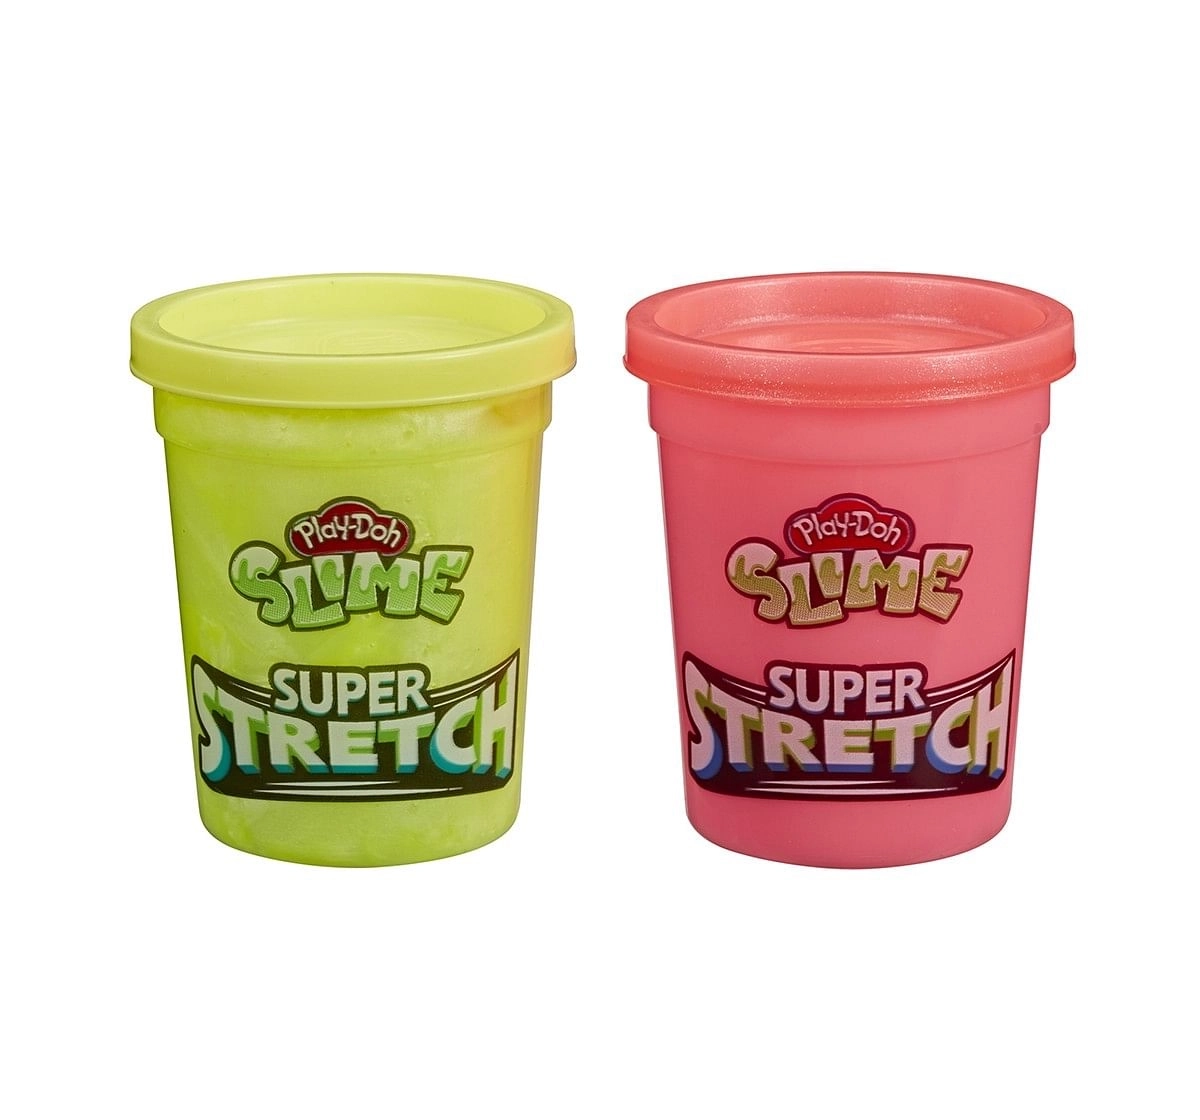 Play-Doh Slime Super Stretch 2-Pack Assorted for Kids 3 Years and Up - Yellow and Red Sand, Slime & Others for Kids age 3Y+ 